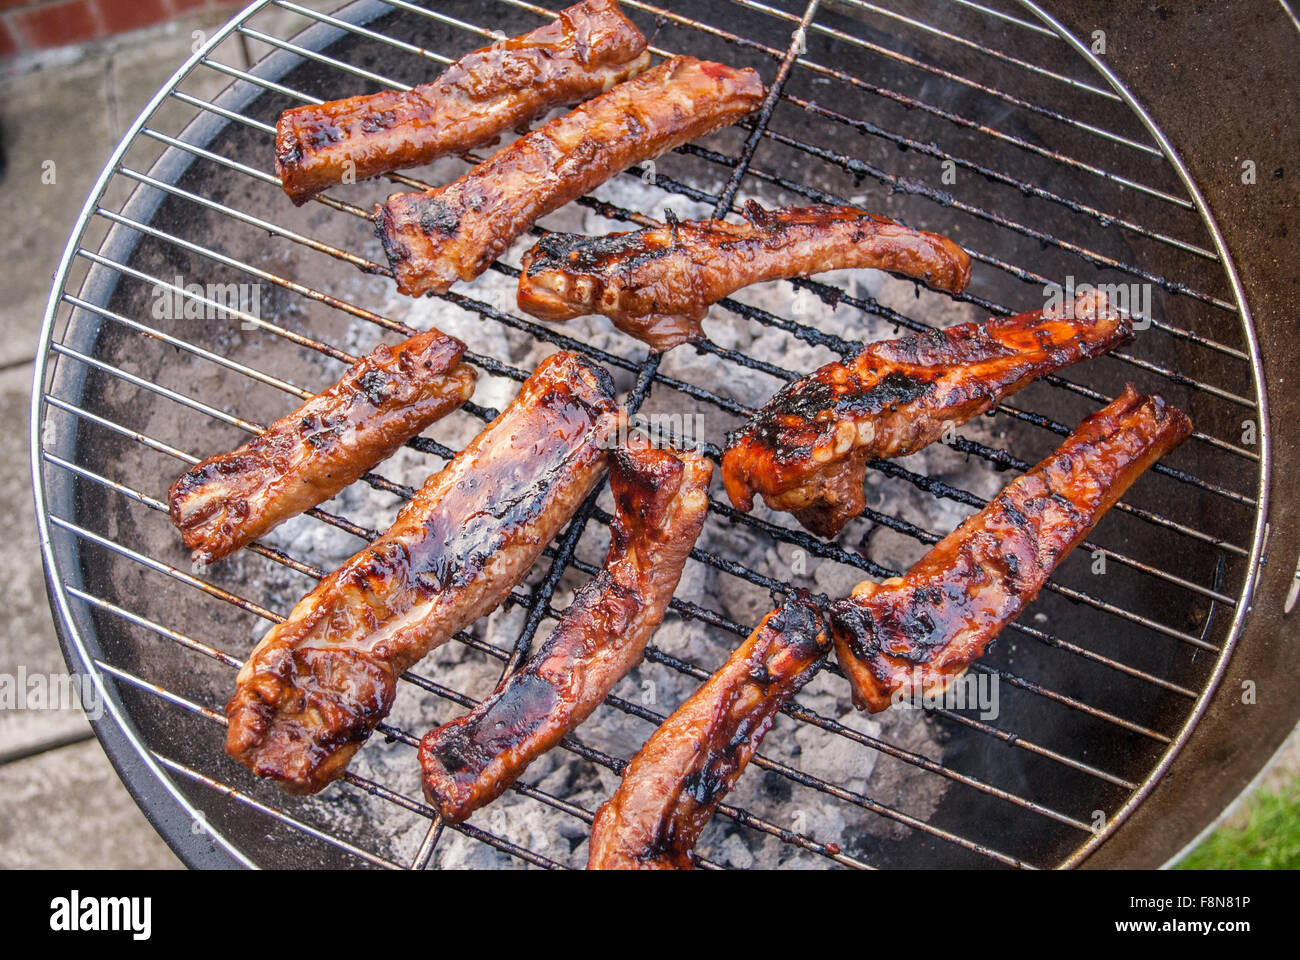 Barbecued pork Ribs on barbecue grill Stock Photo